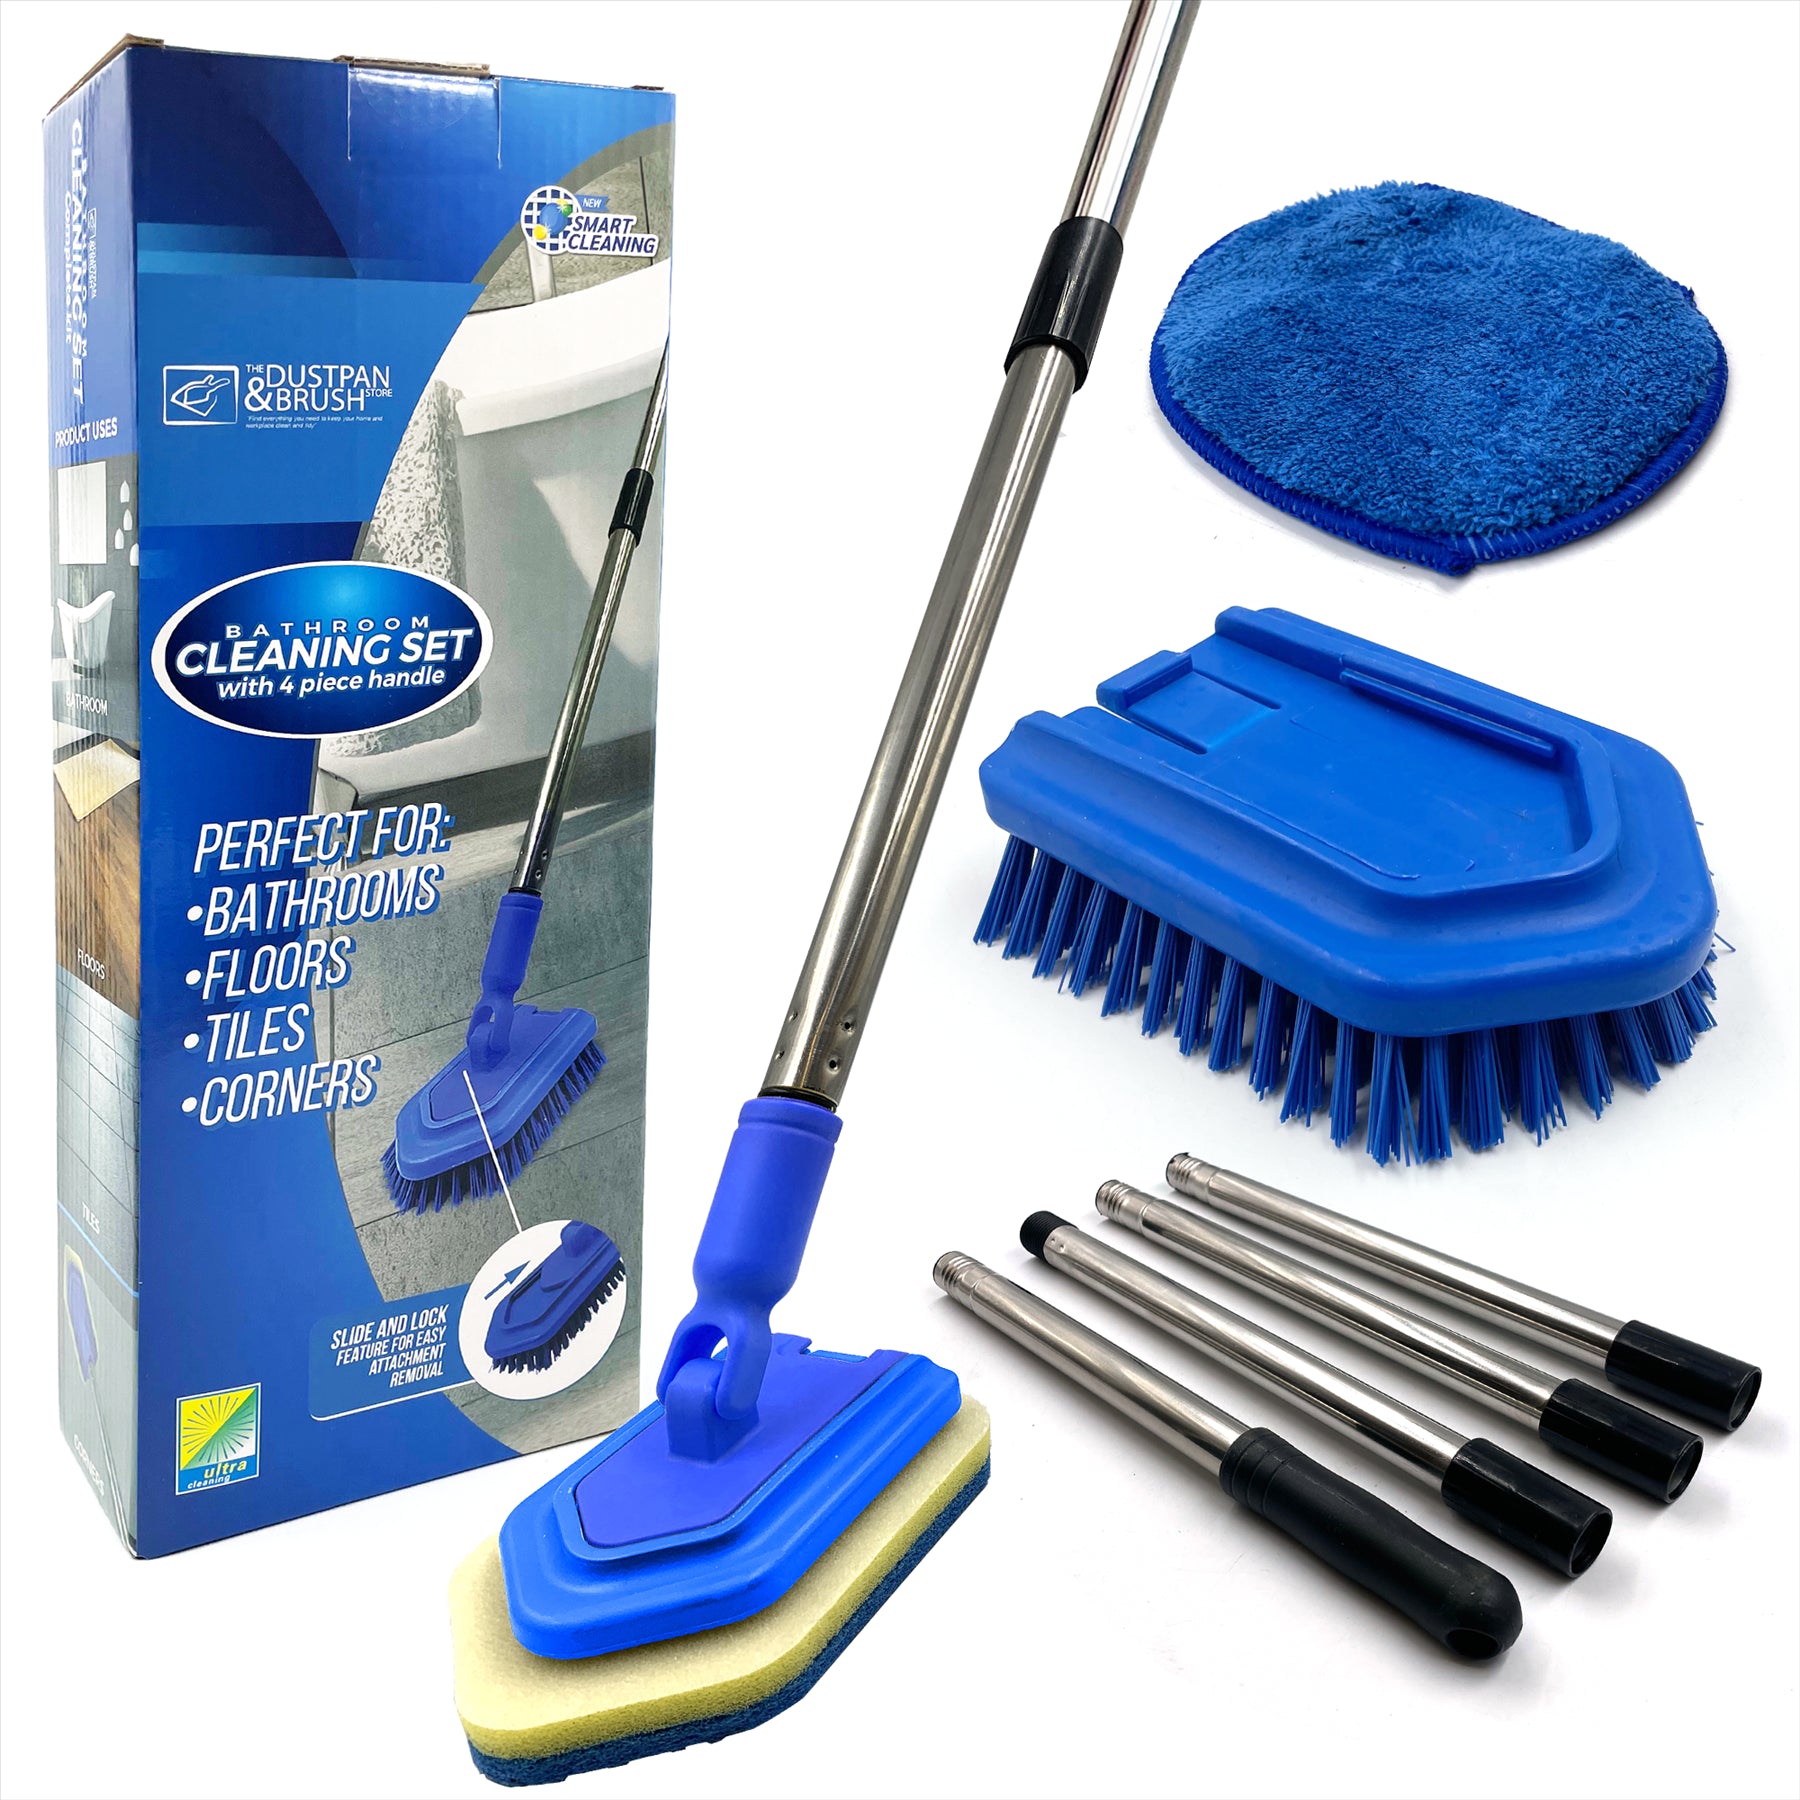 Bathroom Cleaning Set with 4 Piece Handle